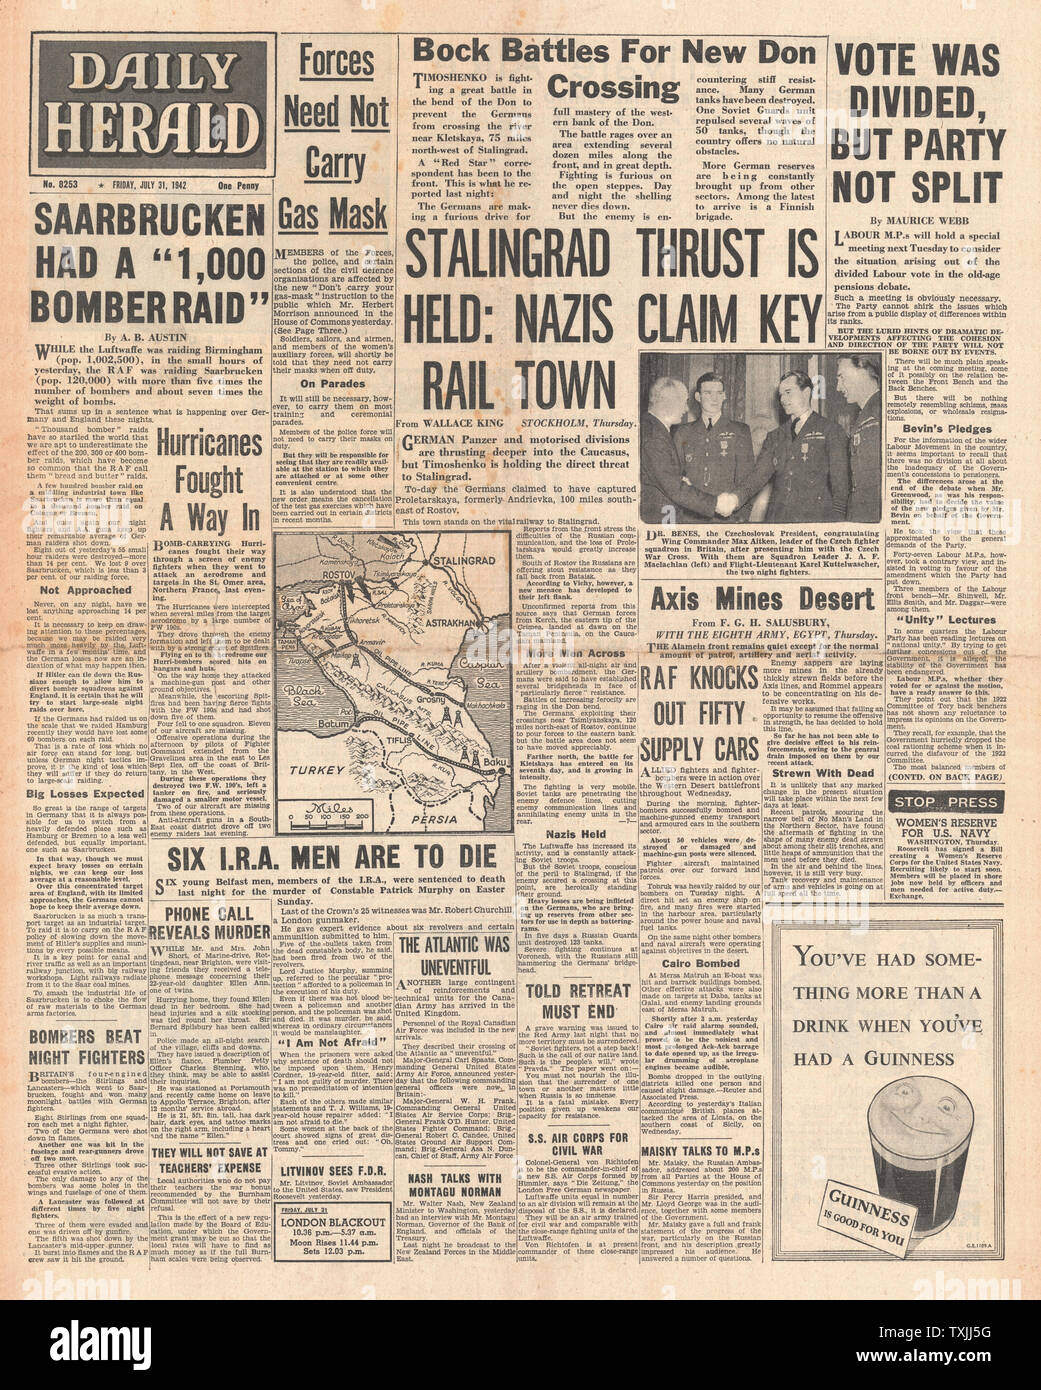 1942 front page  Daily Herald German Army advance on Stalingrad held and RAF Bomb Saarbrucken Stock Photo